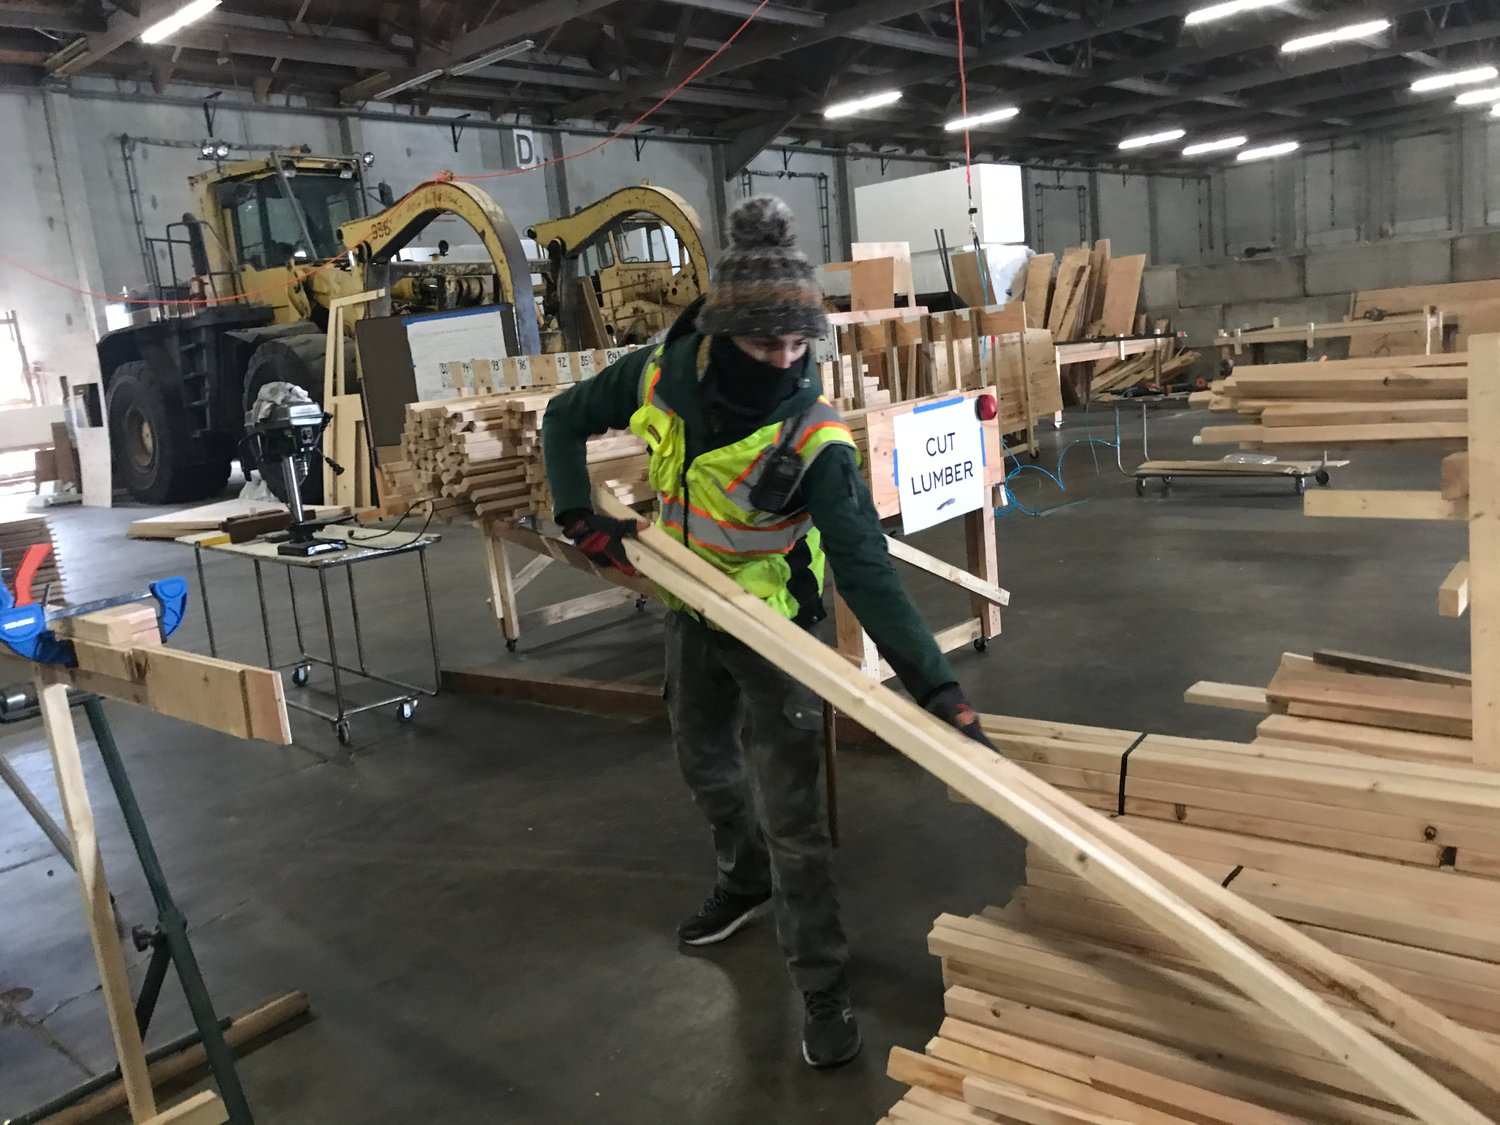 Aaron Sauerhoff, demonstrating steps of constructing a temporary shelter at a shop at the Port of Olympia on Feb. 25, 2021.